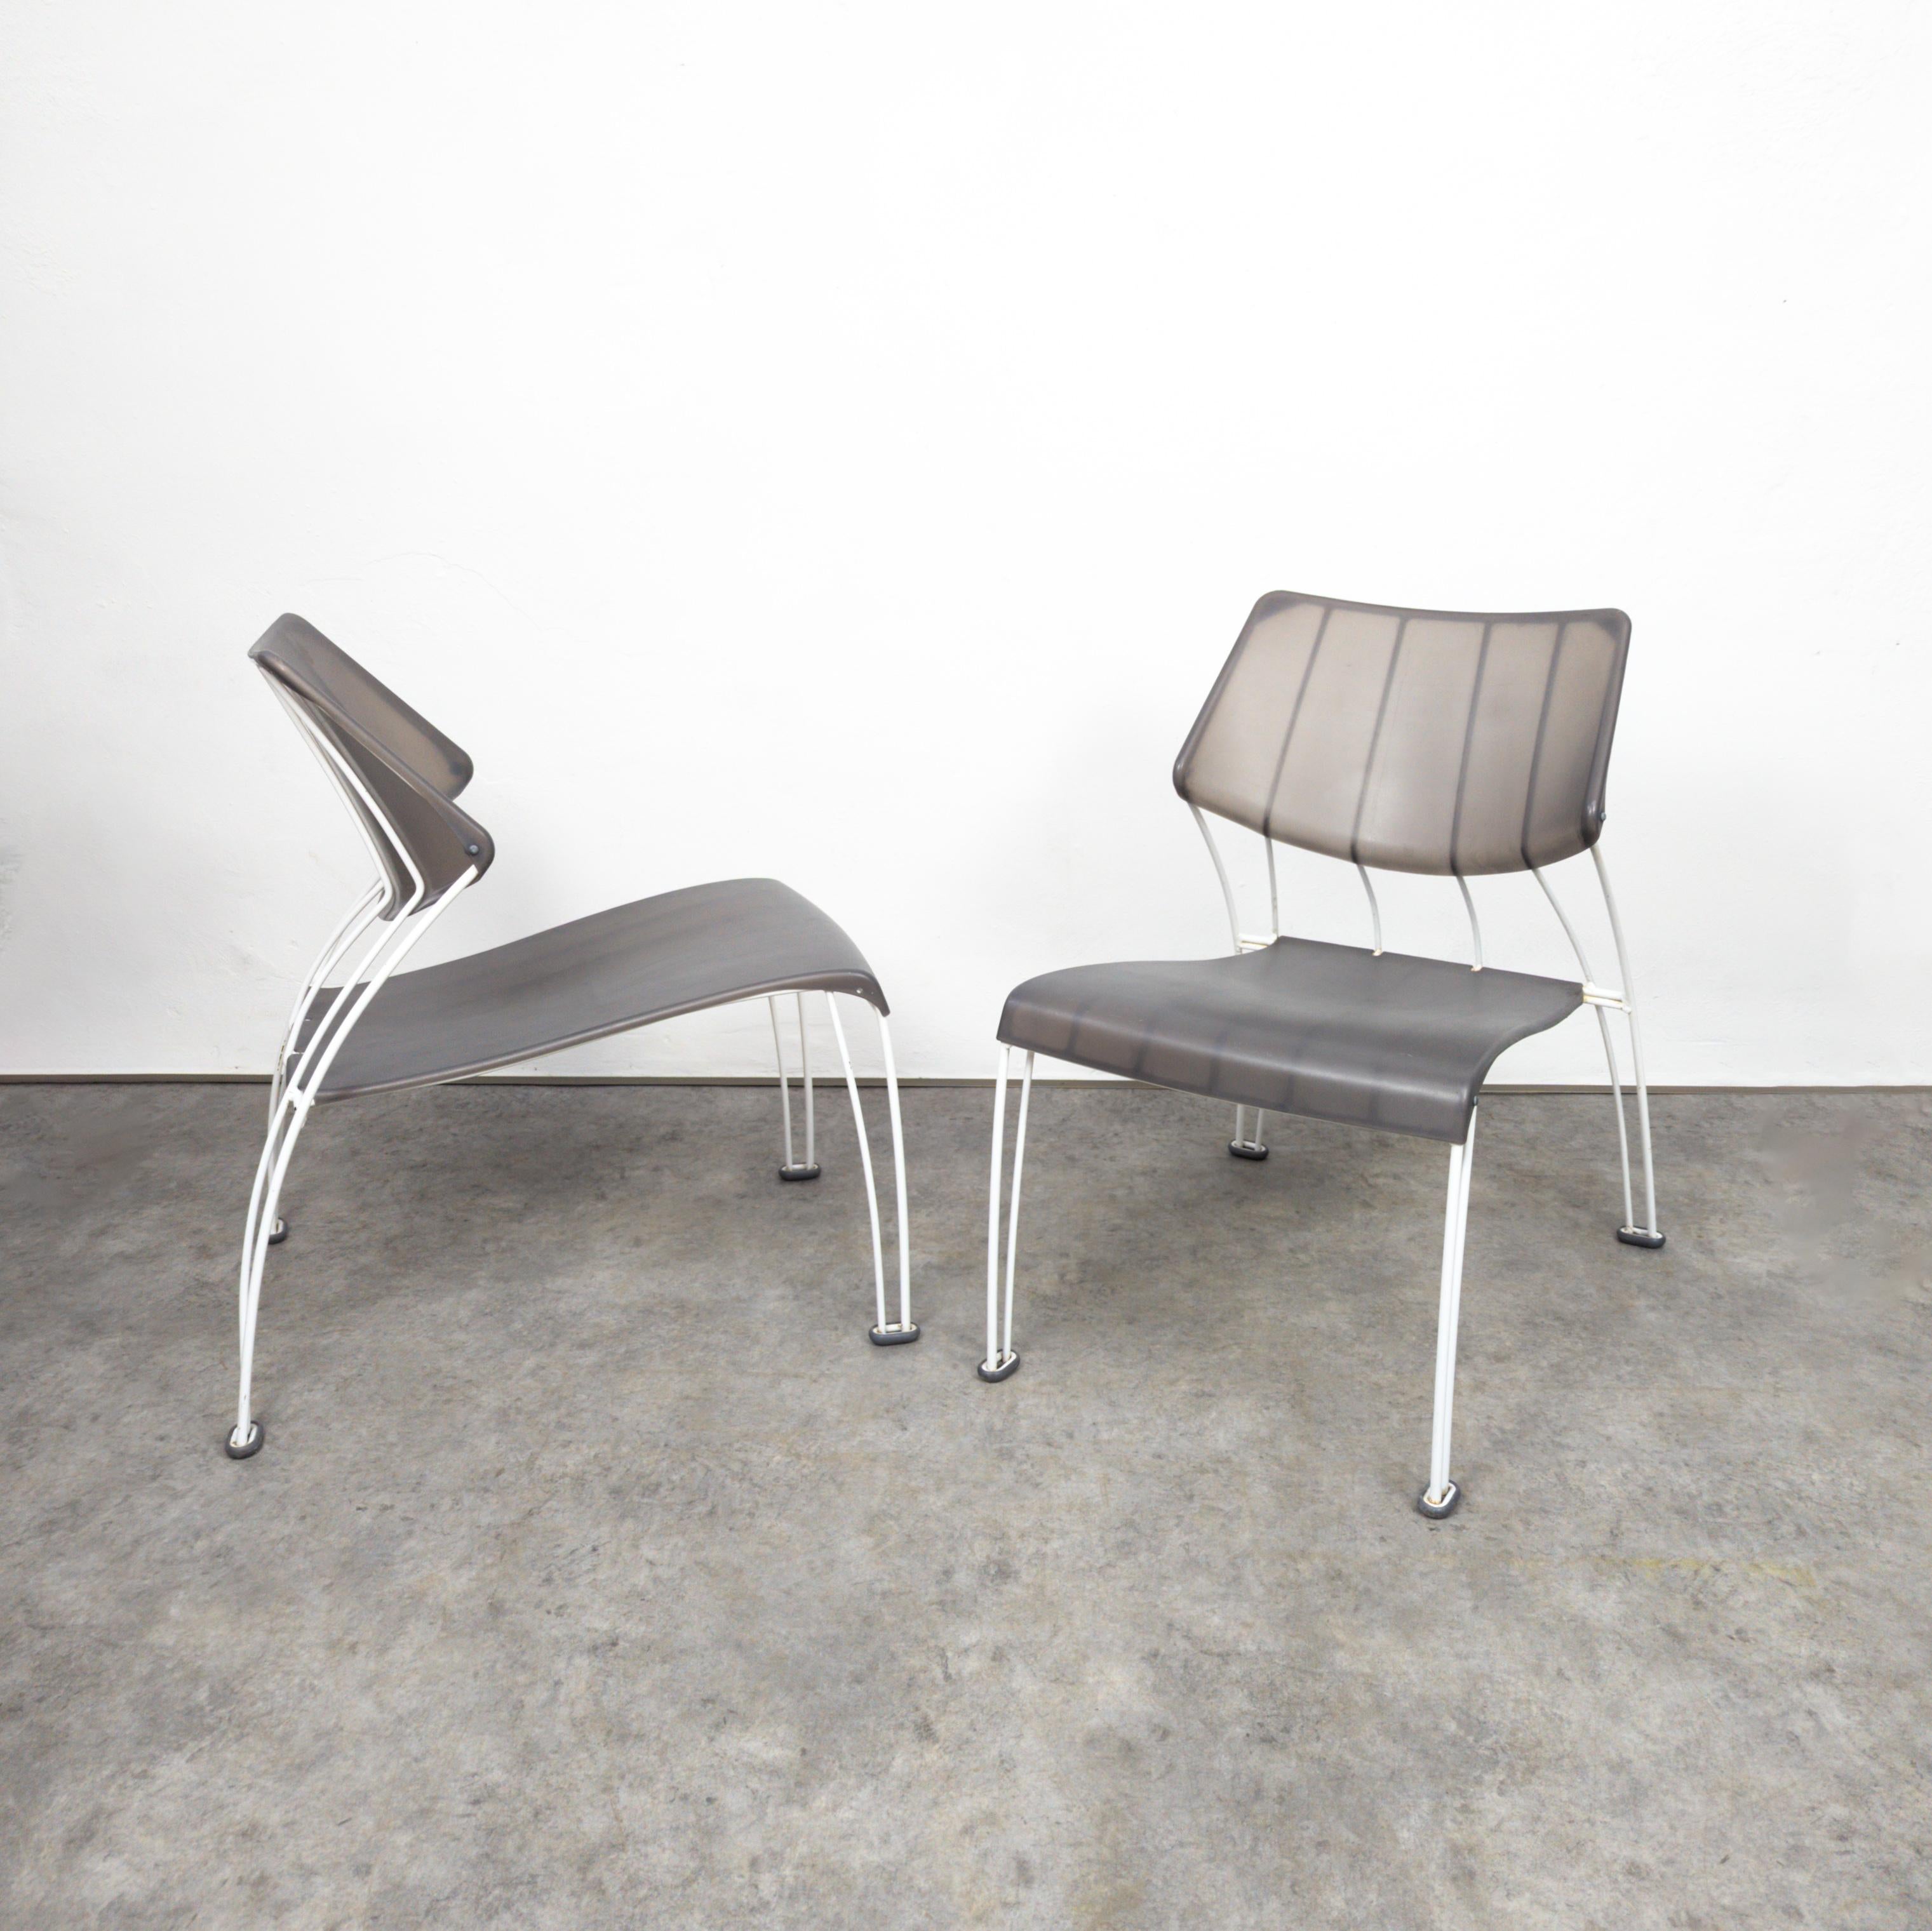 Swedish Pair of PS Hässlö outdoor lounge chairs by Monika Mulder for Ikea, 1990s For Sale